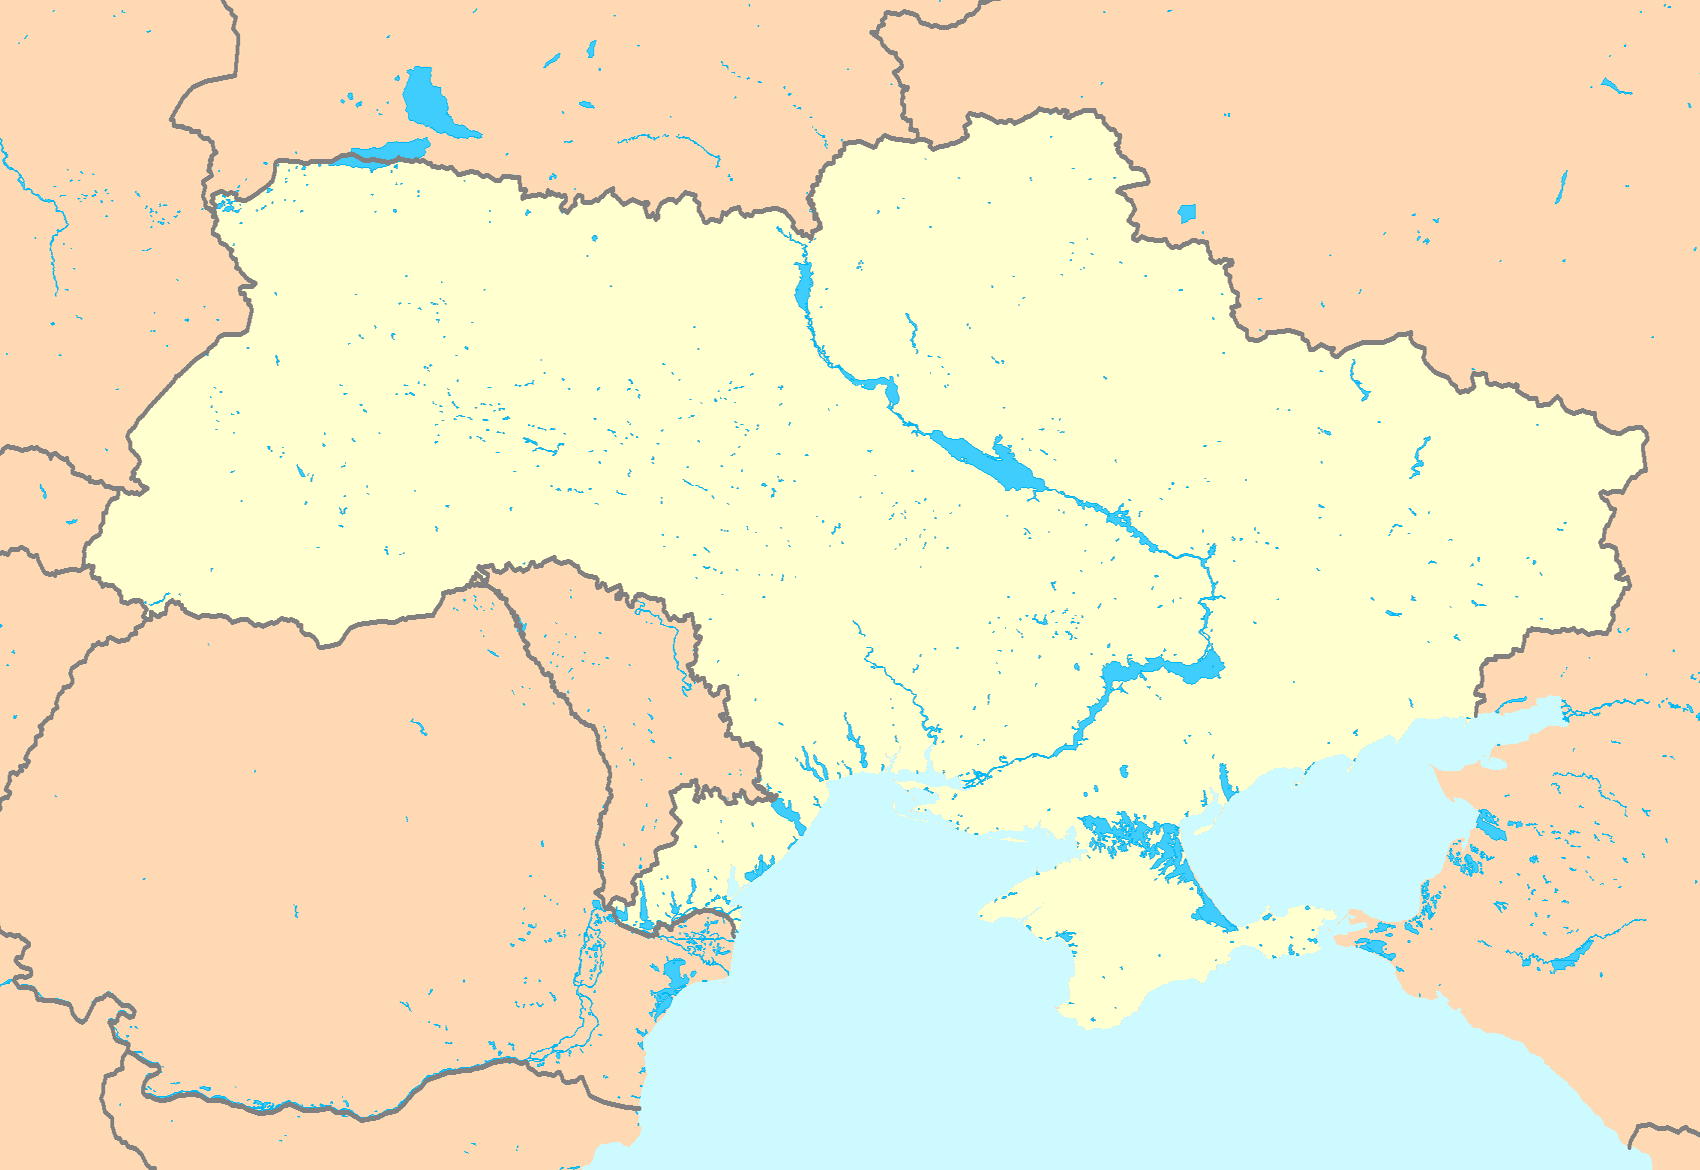 Ukraine political map without political markings